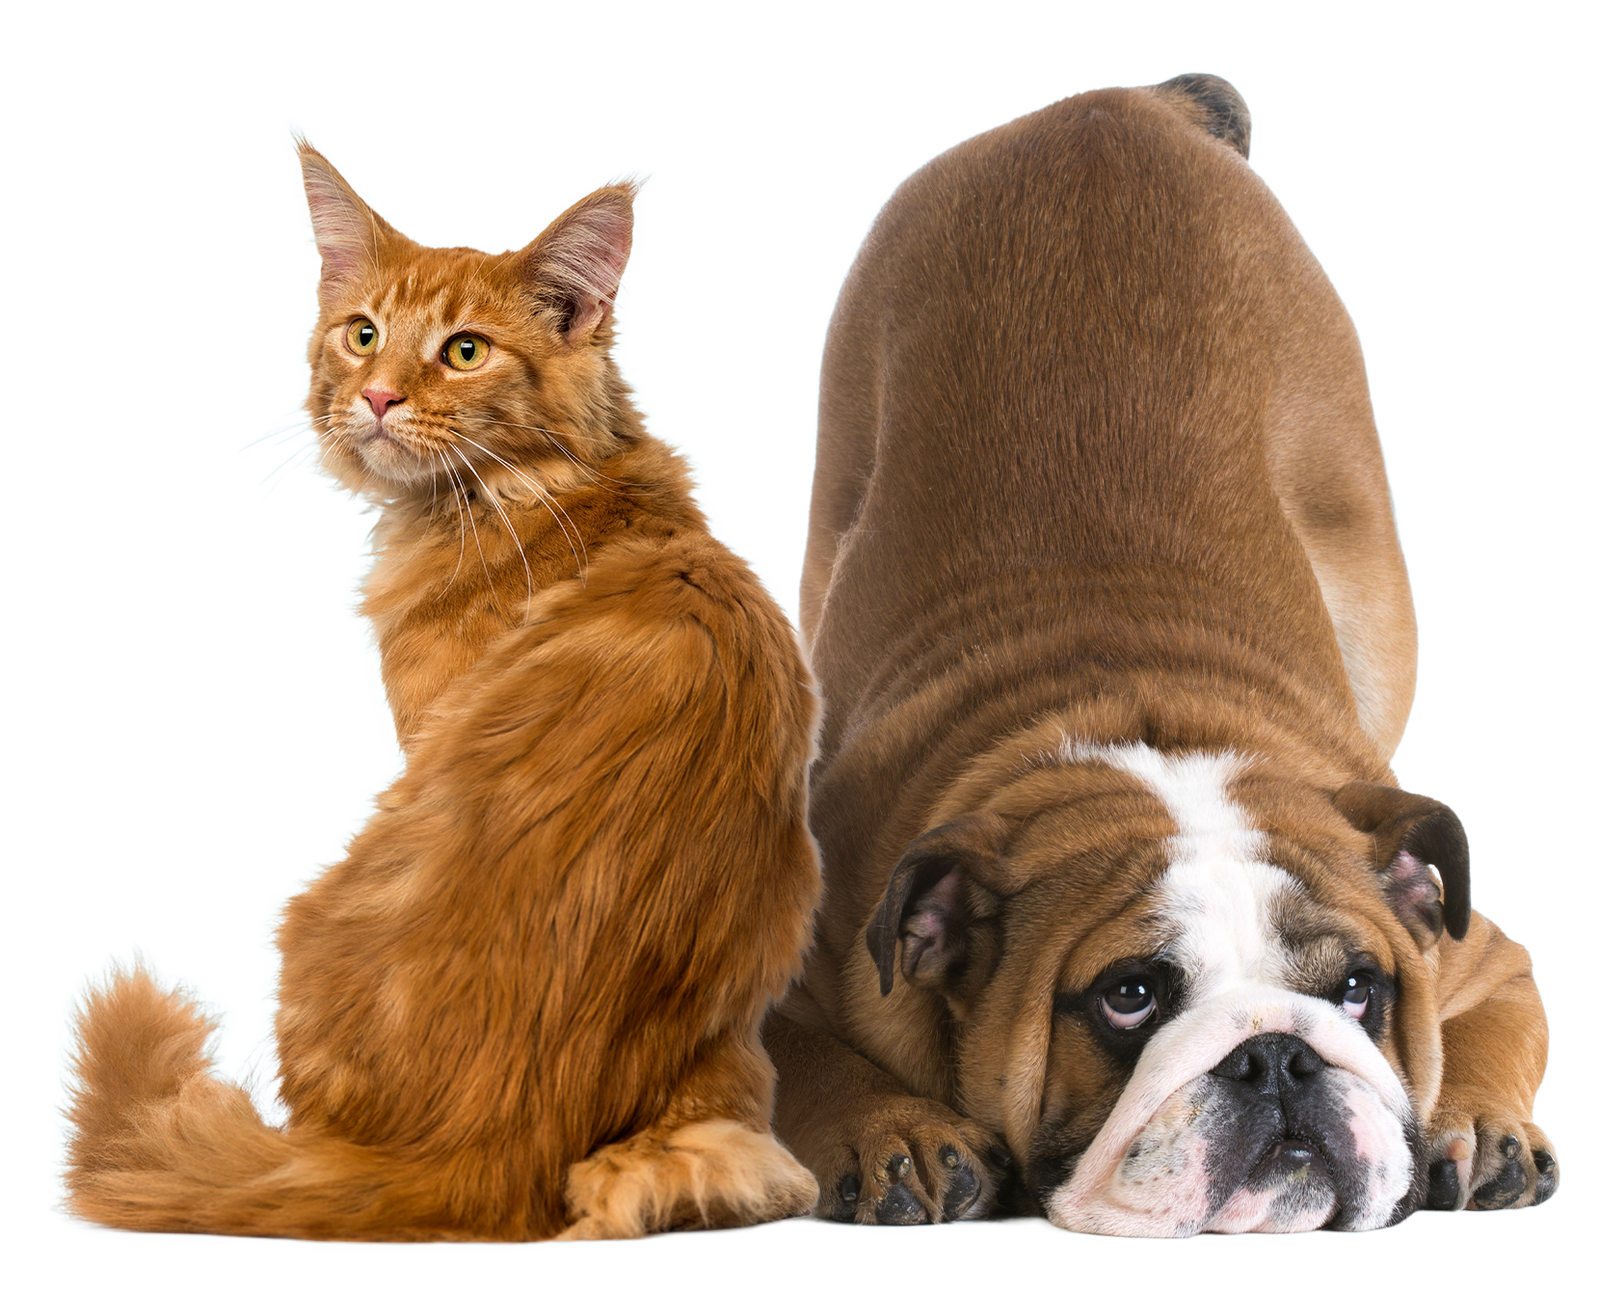 Glandex® Pet Anal Gland Supplements for Dogs & Cats